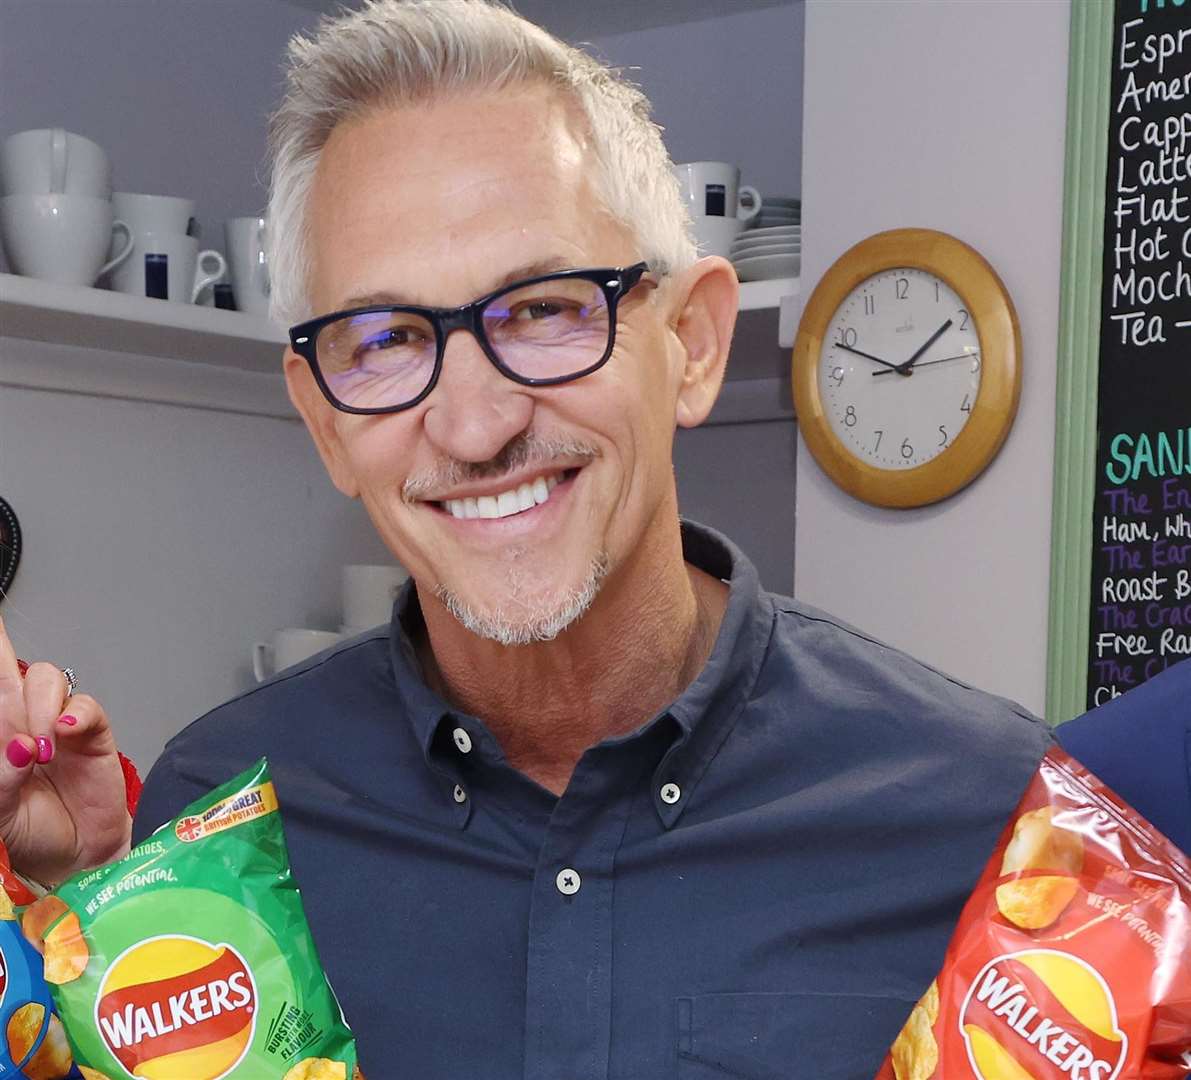 Gary Lineker will not be allowed to sit in the Match of the Day studio. Picture: Walkers